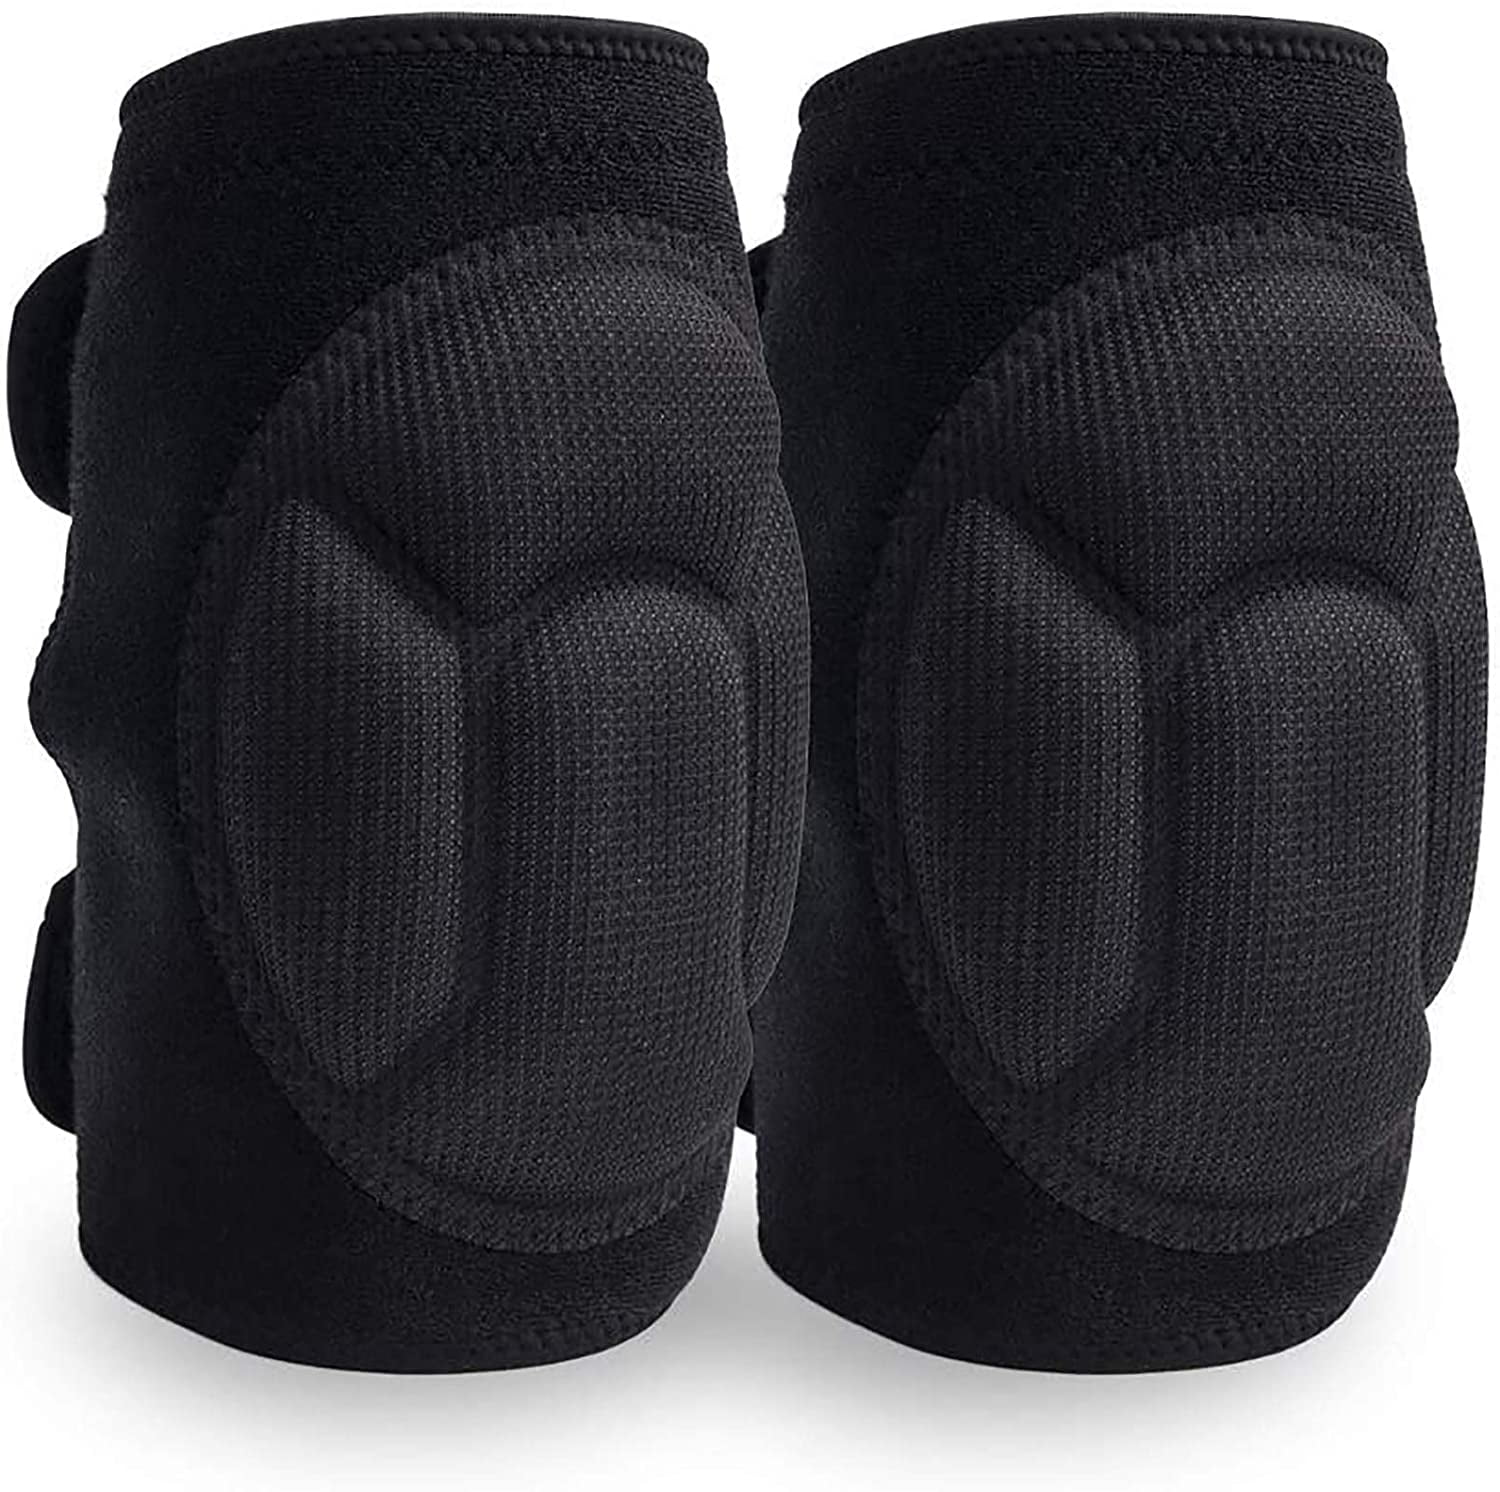 Deago Yoga Knee Pads (Set of 2) - Yoga Props and Accessories for Women/Men  Cushions Knees and Elbows for Fitness, Travel, Meditation, Kneeling